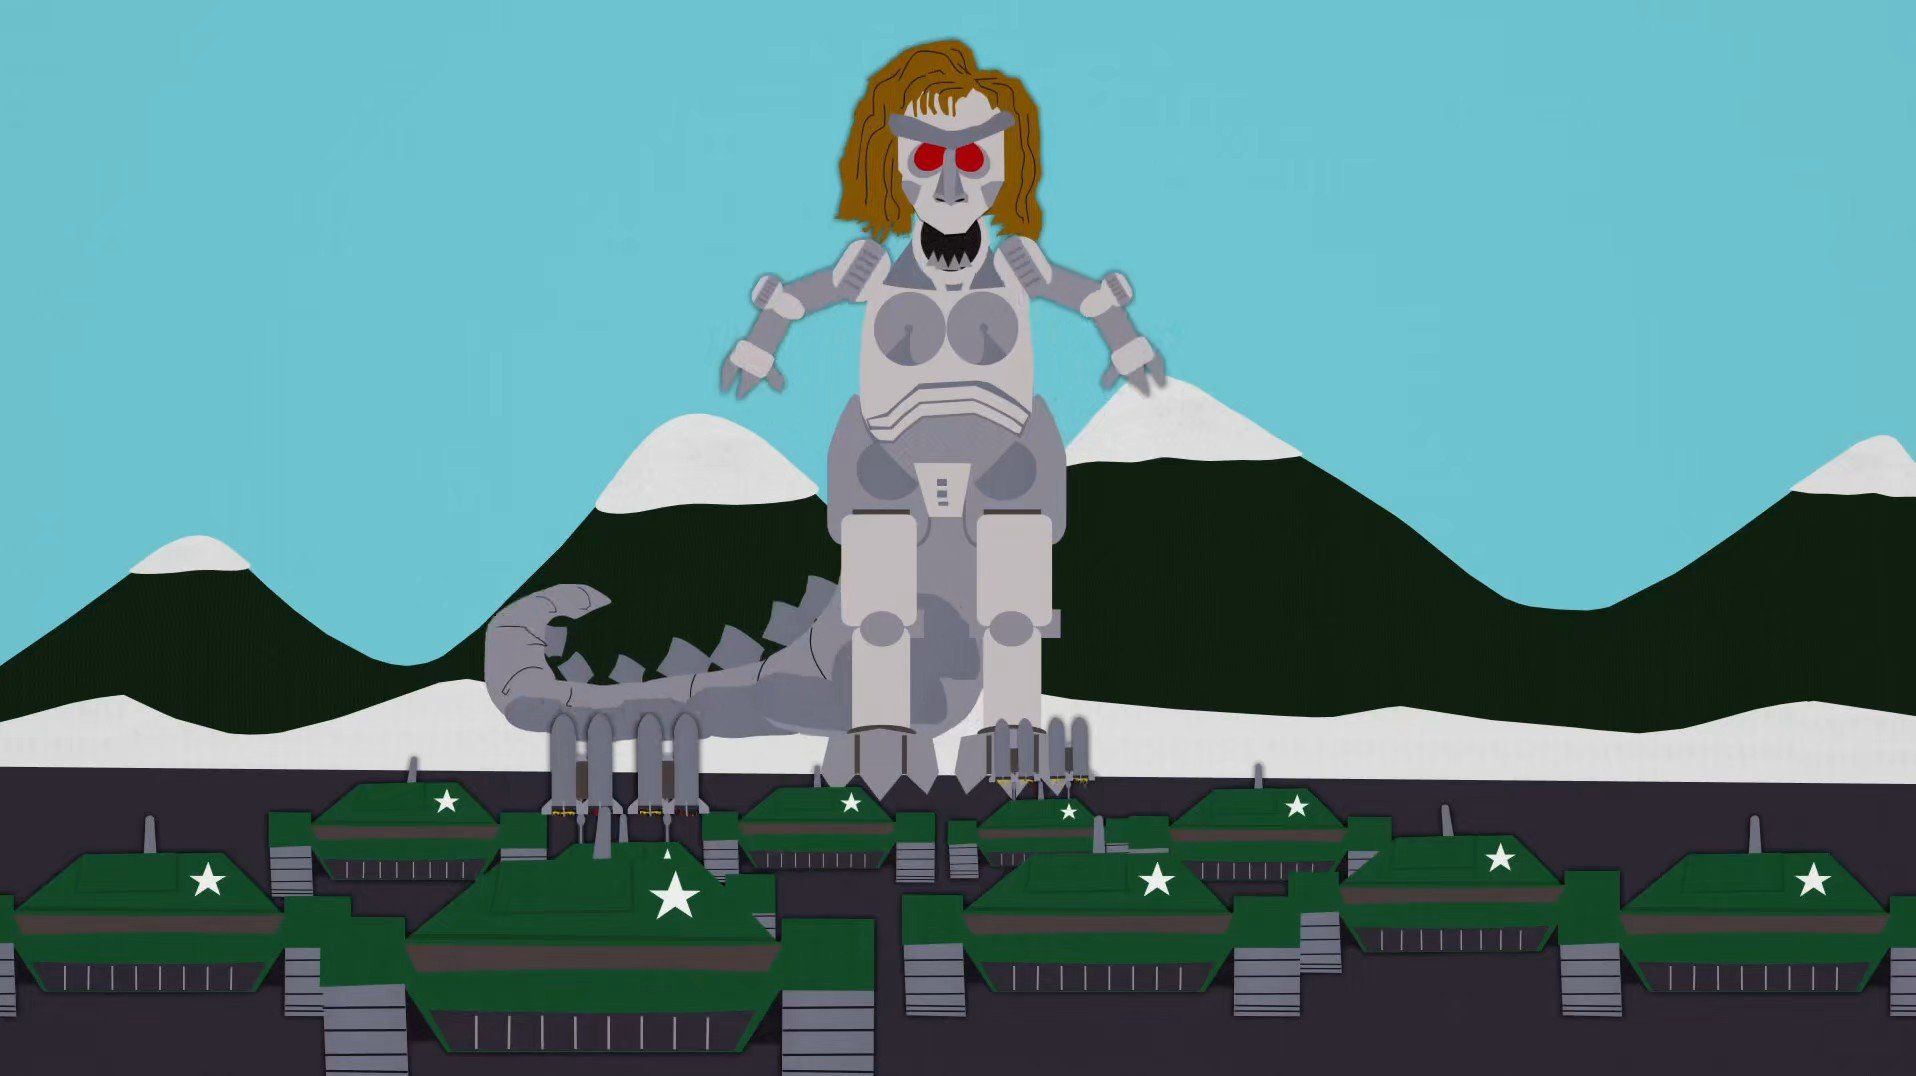 Picture of animated Mech-Streisand from South Park.